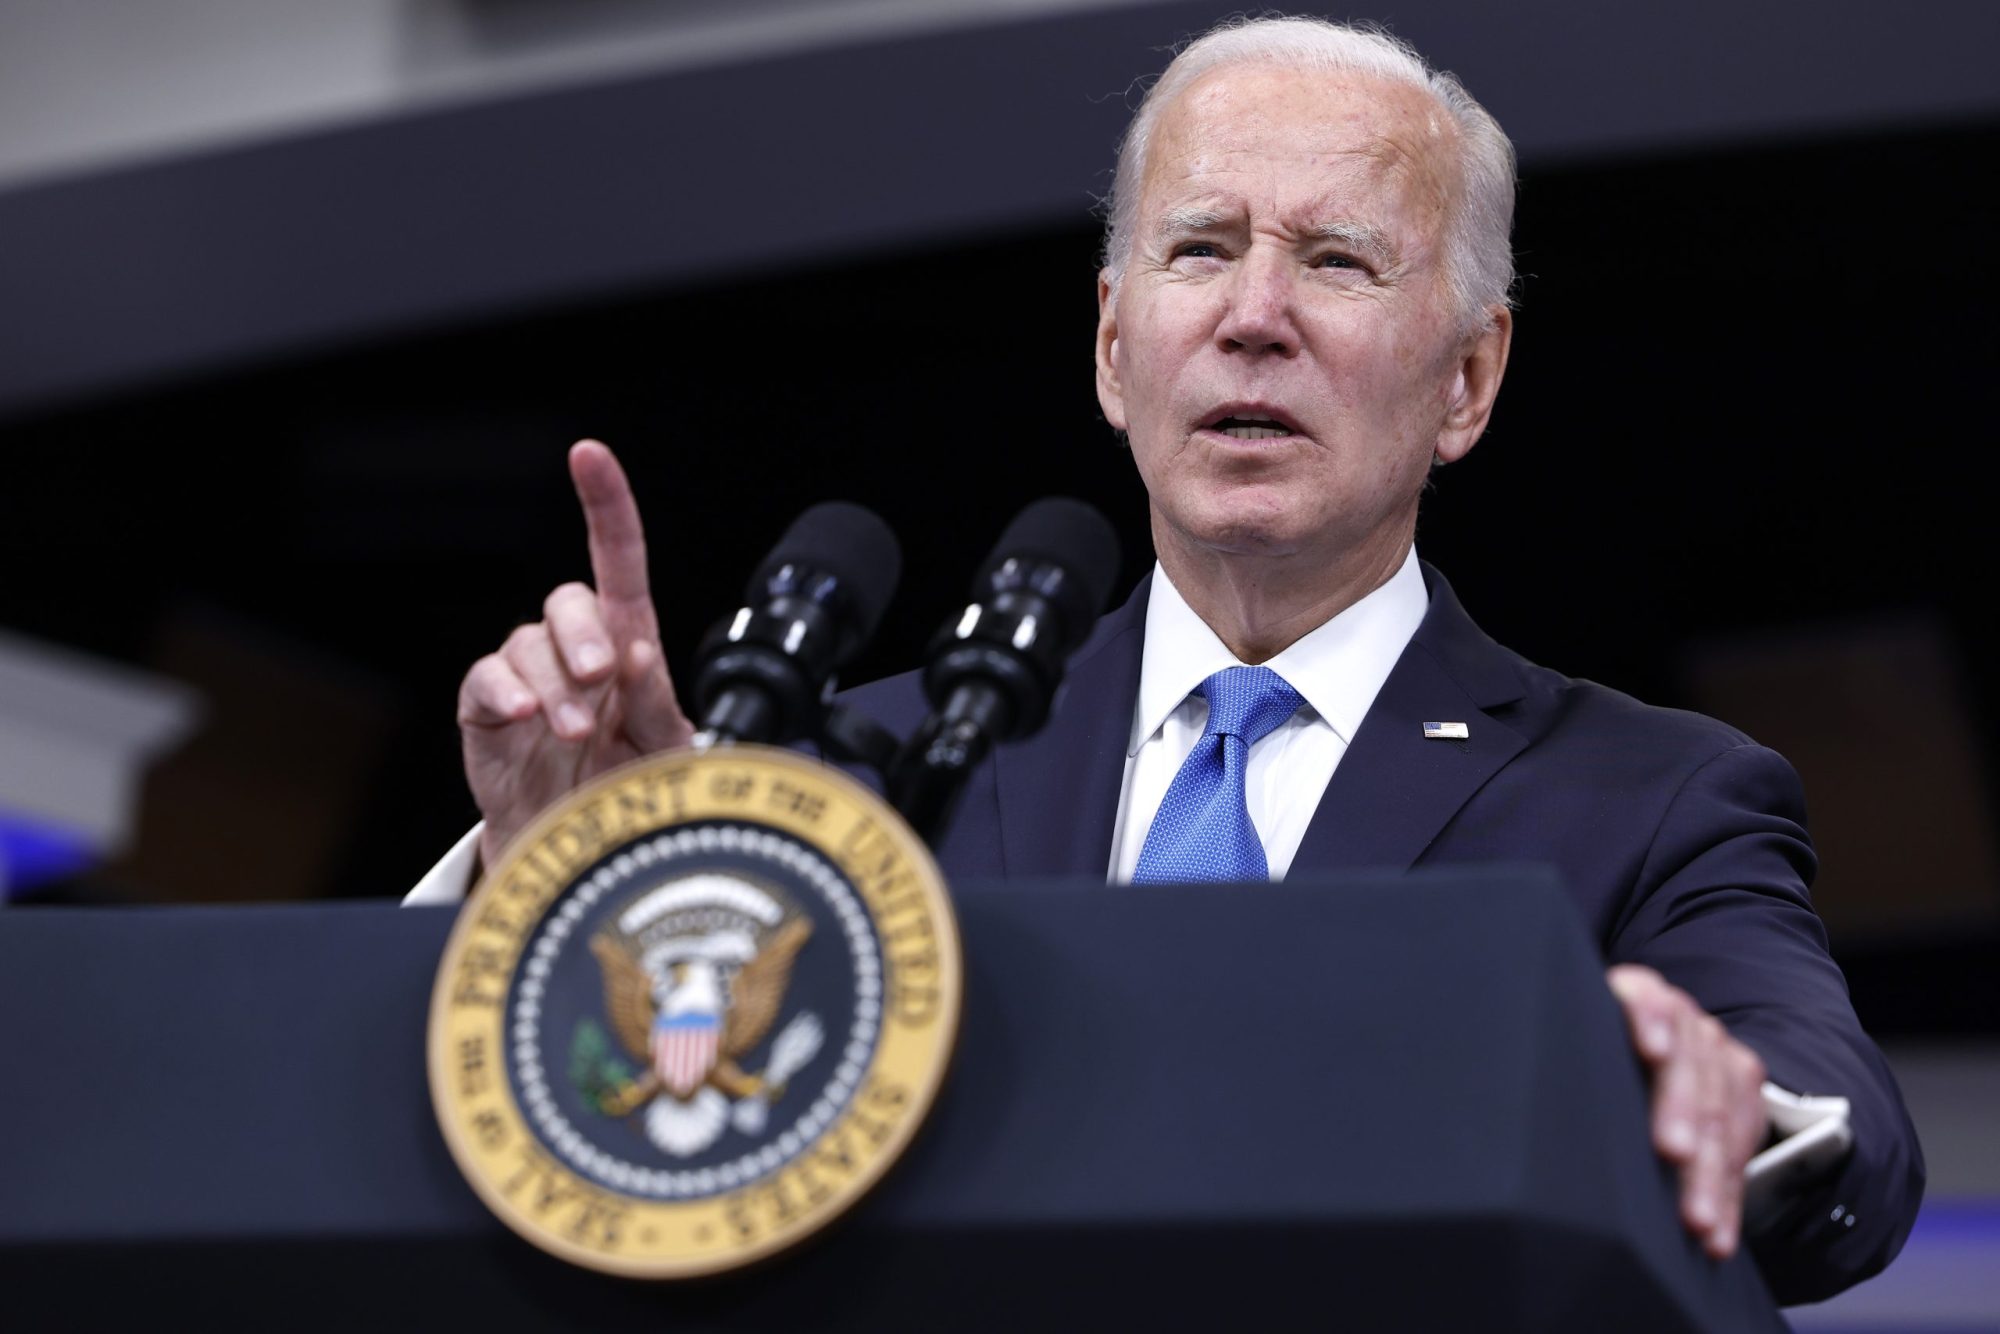 President Joe Biden gives remarks on the status of COVID-19 in the United States from the South Court Auditorium at the White House campus on Oct. 25, 2022, in Washington, DC.